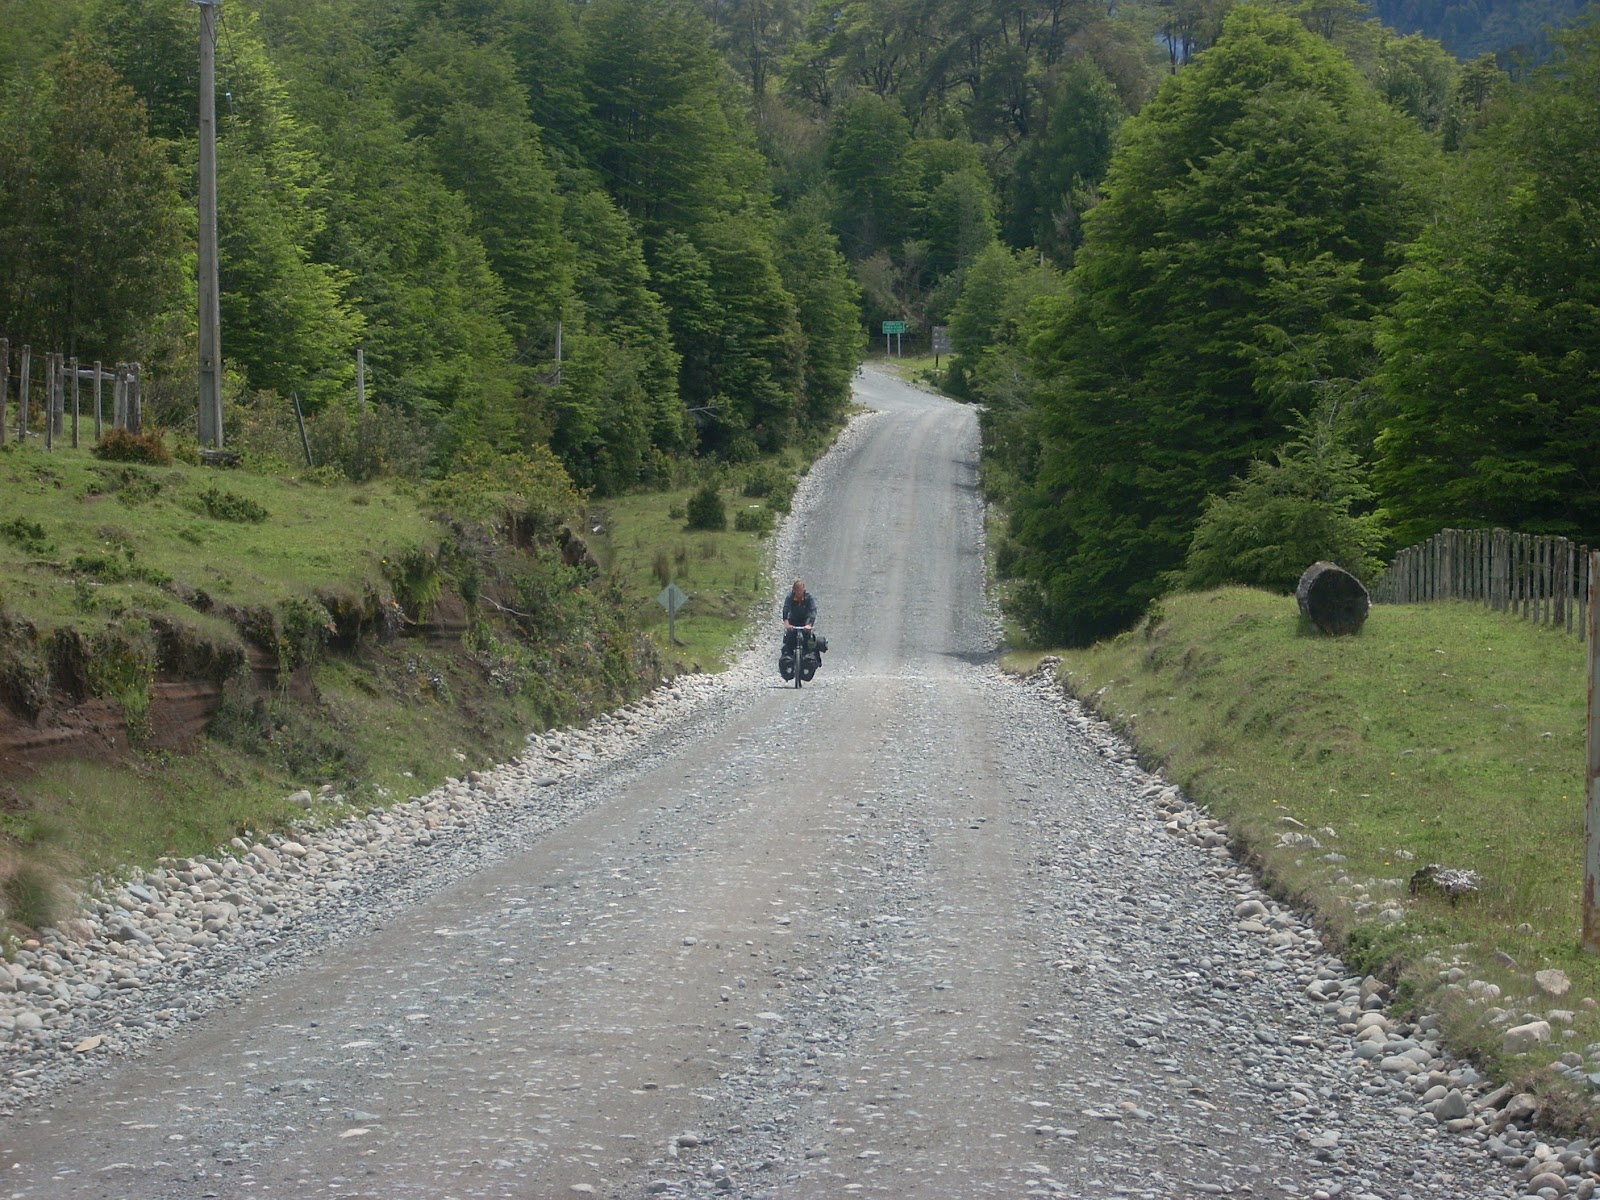 First day on the Carretera Austral proper